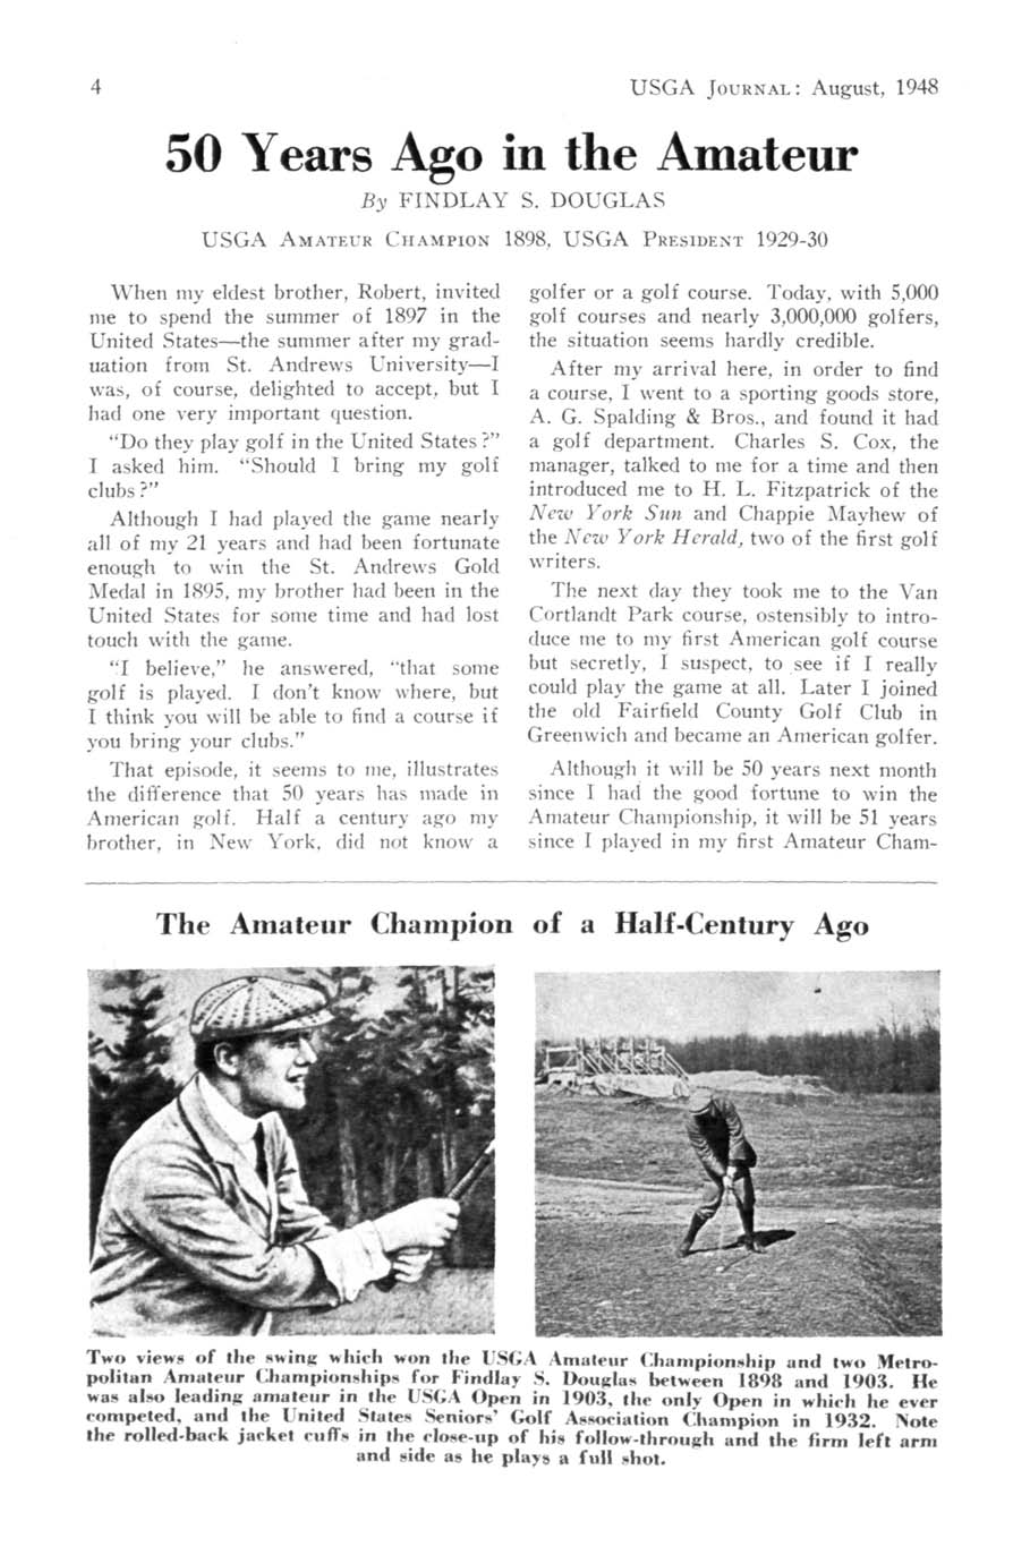 50 Years Ago in the Amateur by FINDLAY S